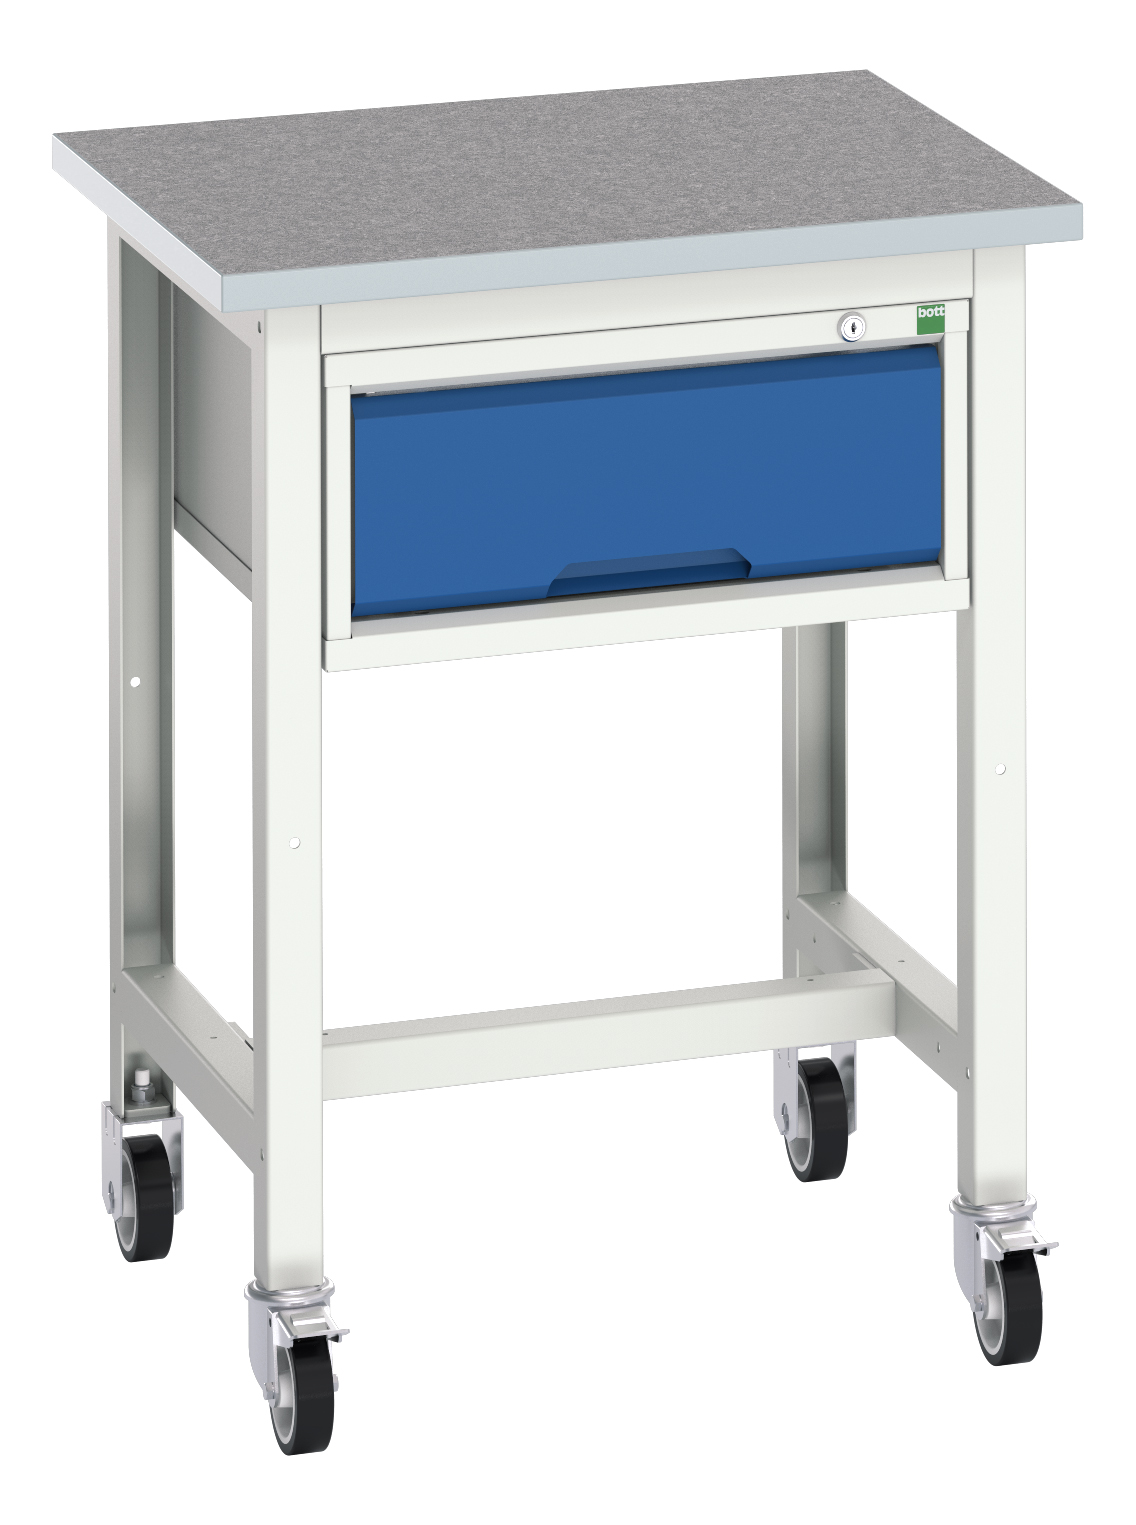 Bott Verso Mobile Workstand With 1 Drawer Cabinet - 16922201.11